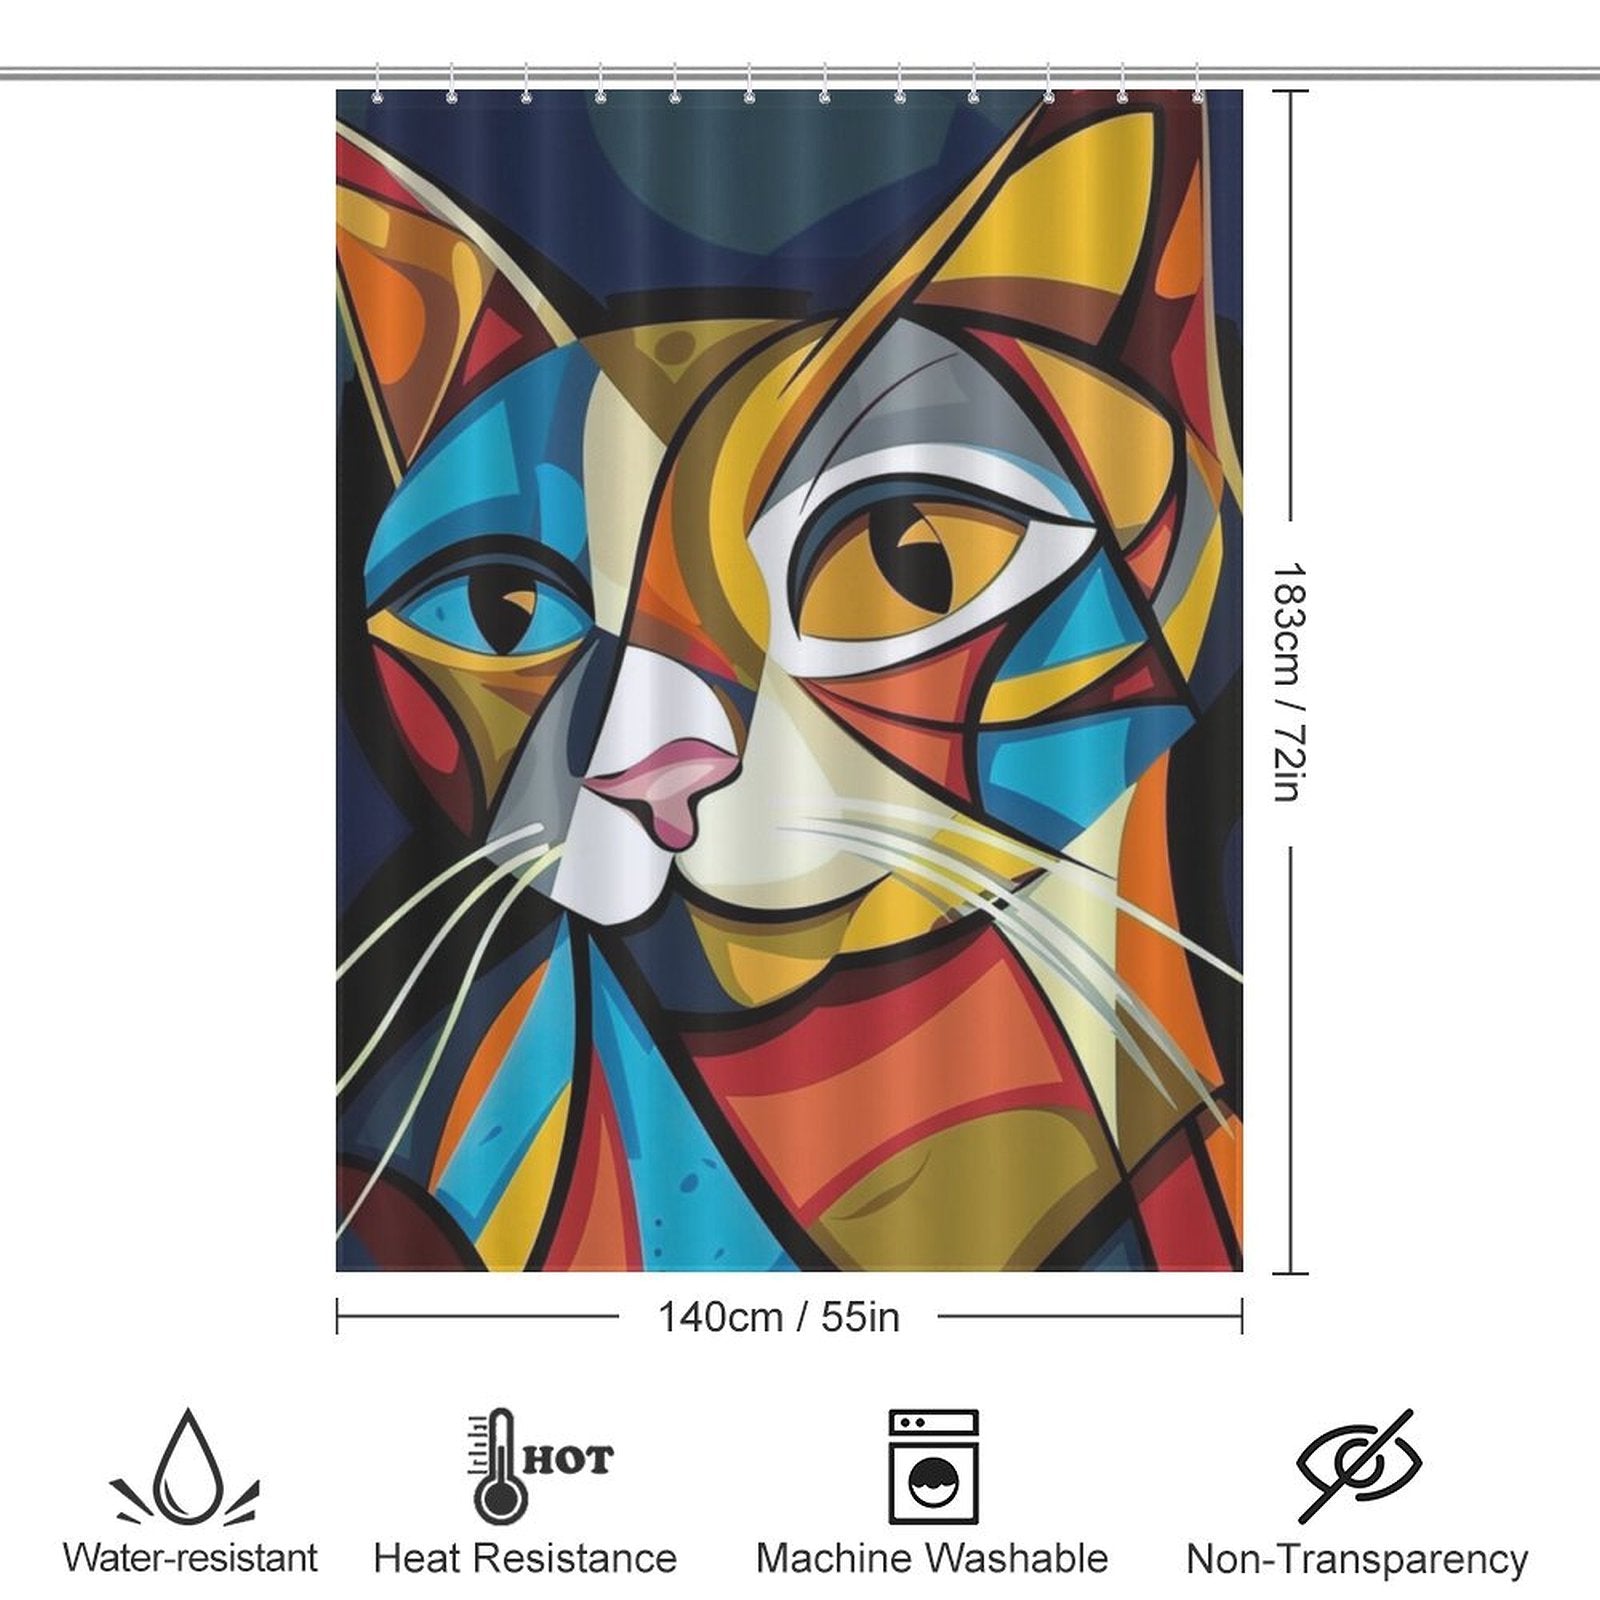 Abstract Geometric Vintage Colorful Modern Art Minimalist Mid Century Cat Shower Curtain-Cottoncat by Cotton Cat measuring 183 cm by 140 cm with water-resistant, heat-resistant, machine washable, and non-transparent features.